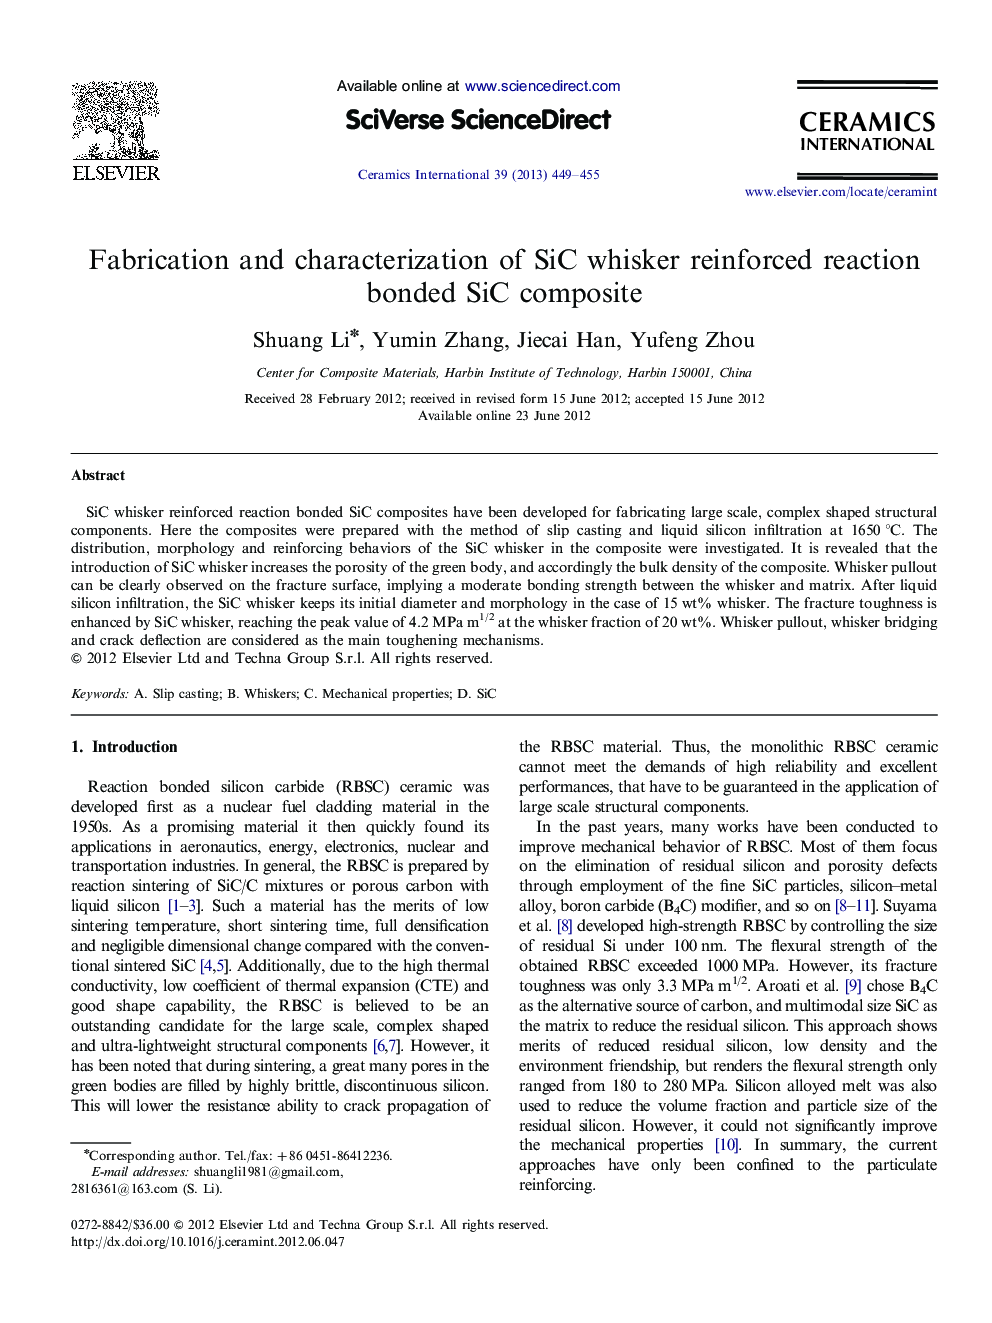 Fabrication and characterization of SiC whisker reinforced reaction bonded SiC composite